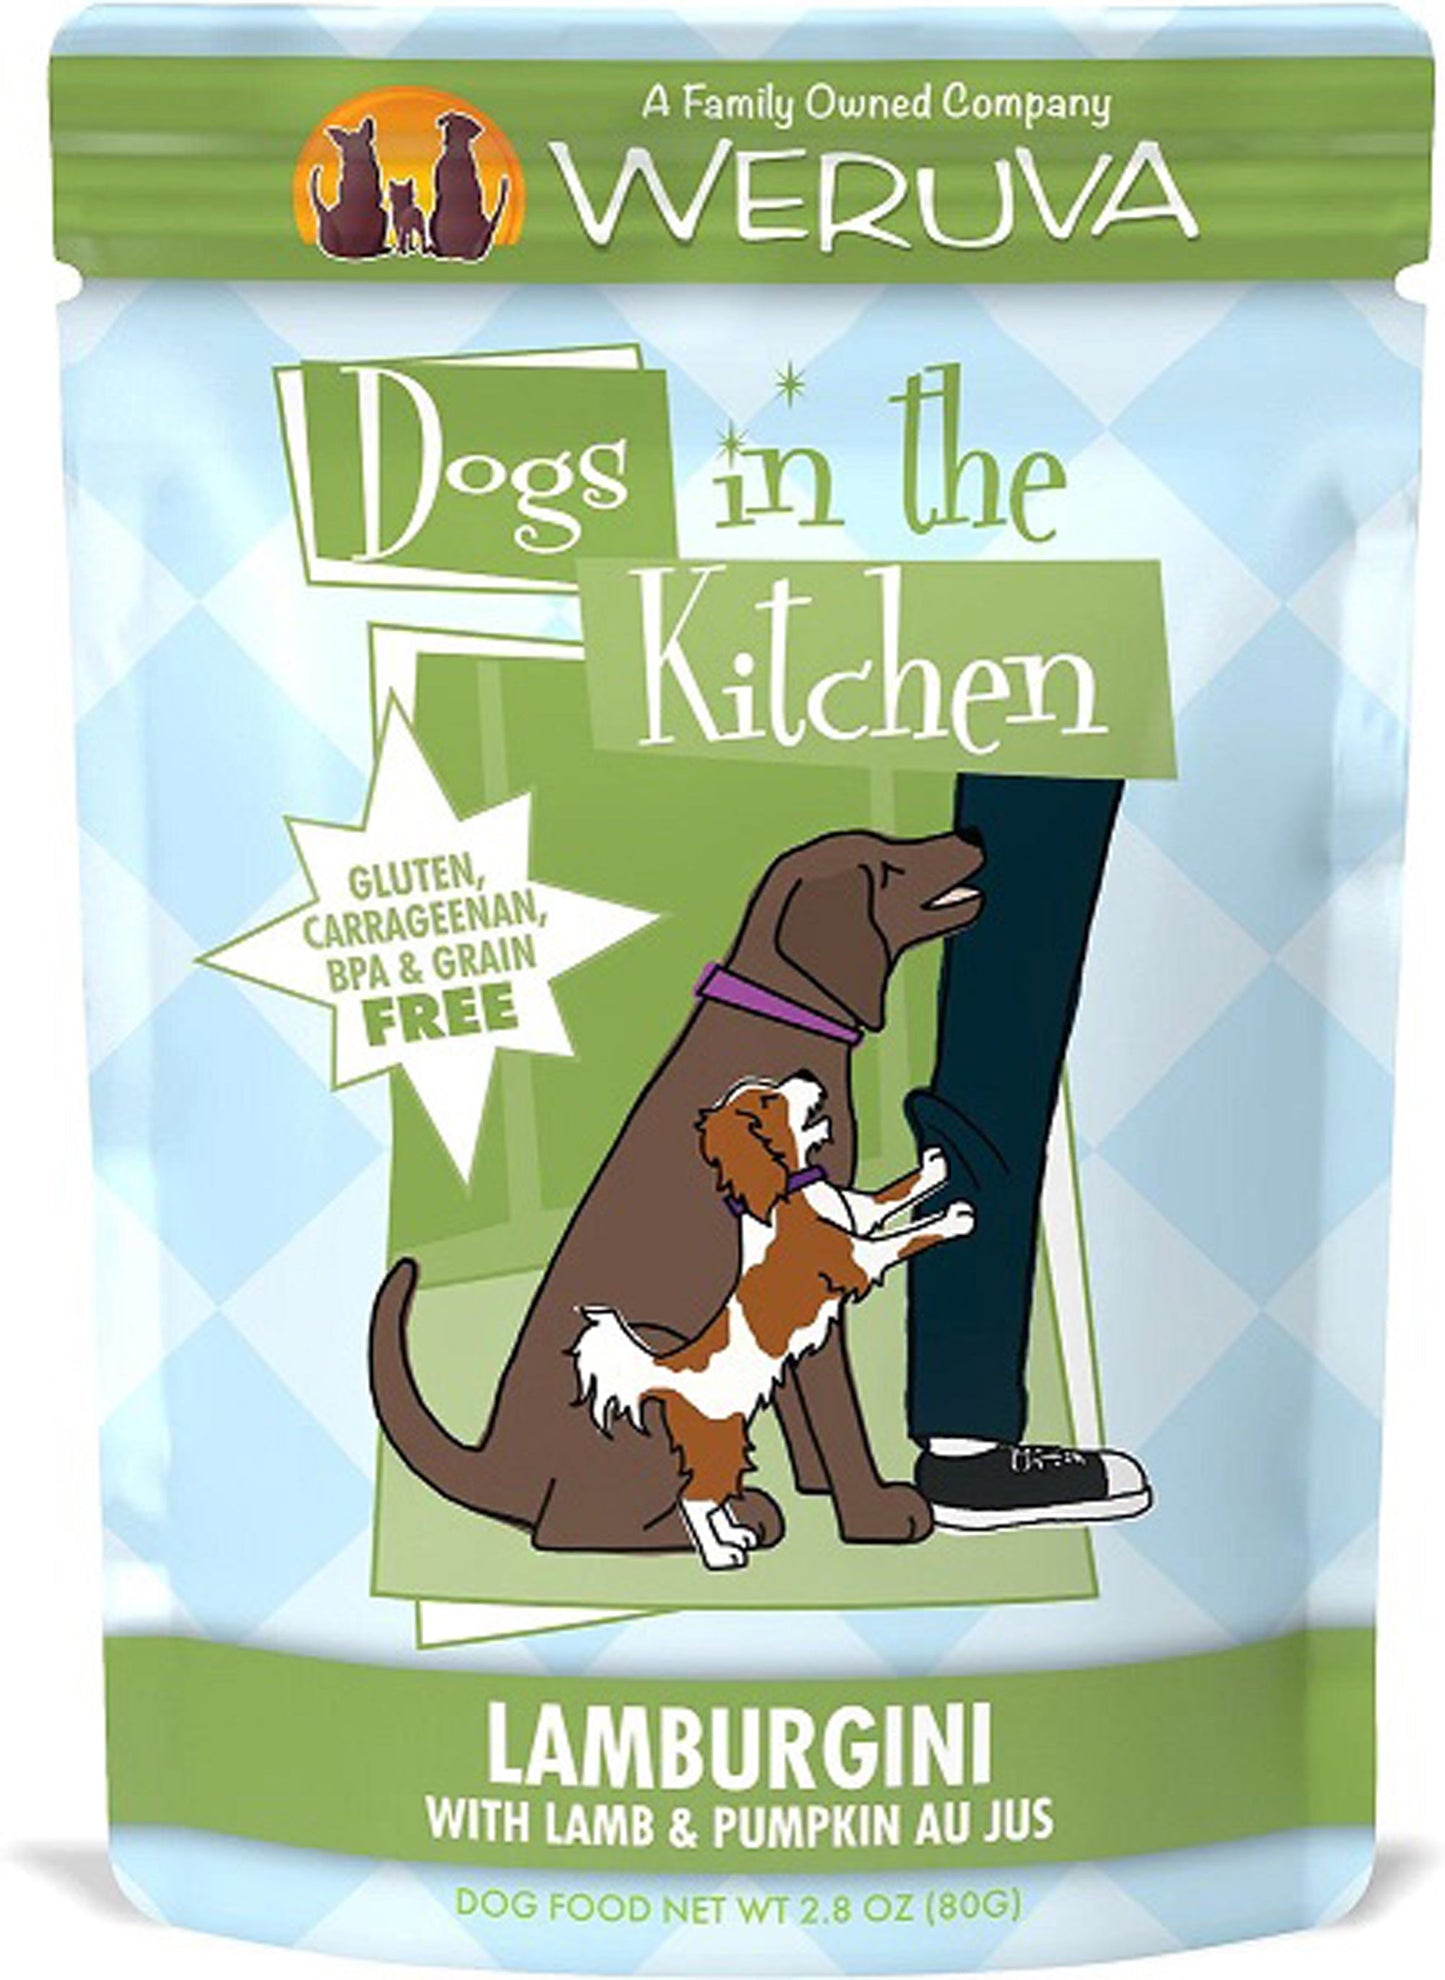 Dogs In The Kitchen Dog Lamburgini With Lamb & Pumpkin Au Jus 2.8oz. Pouch (Case of 12)